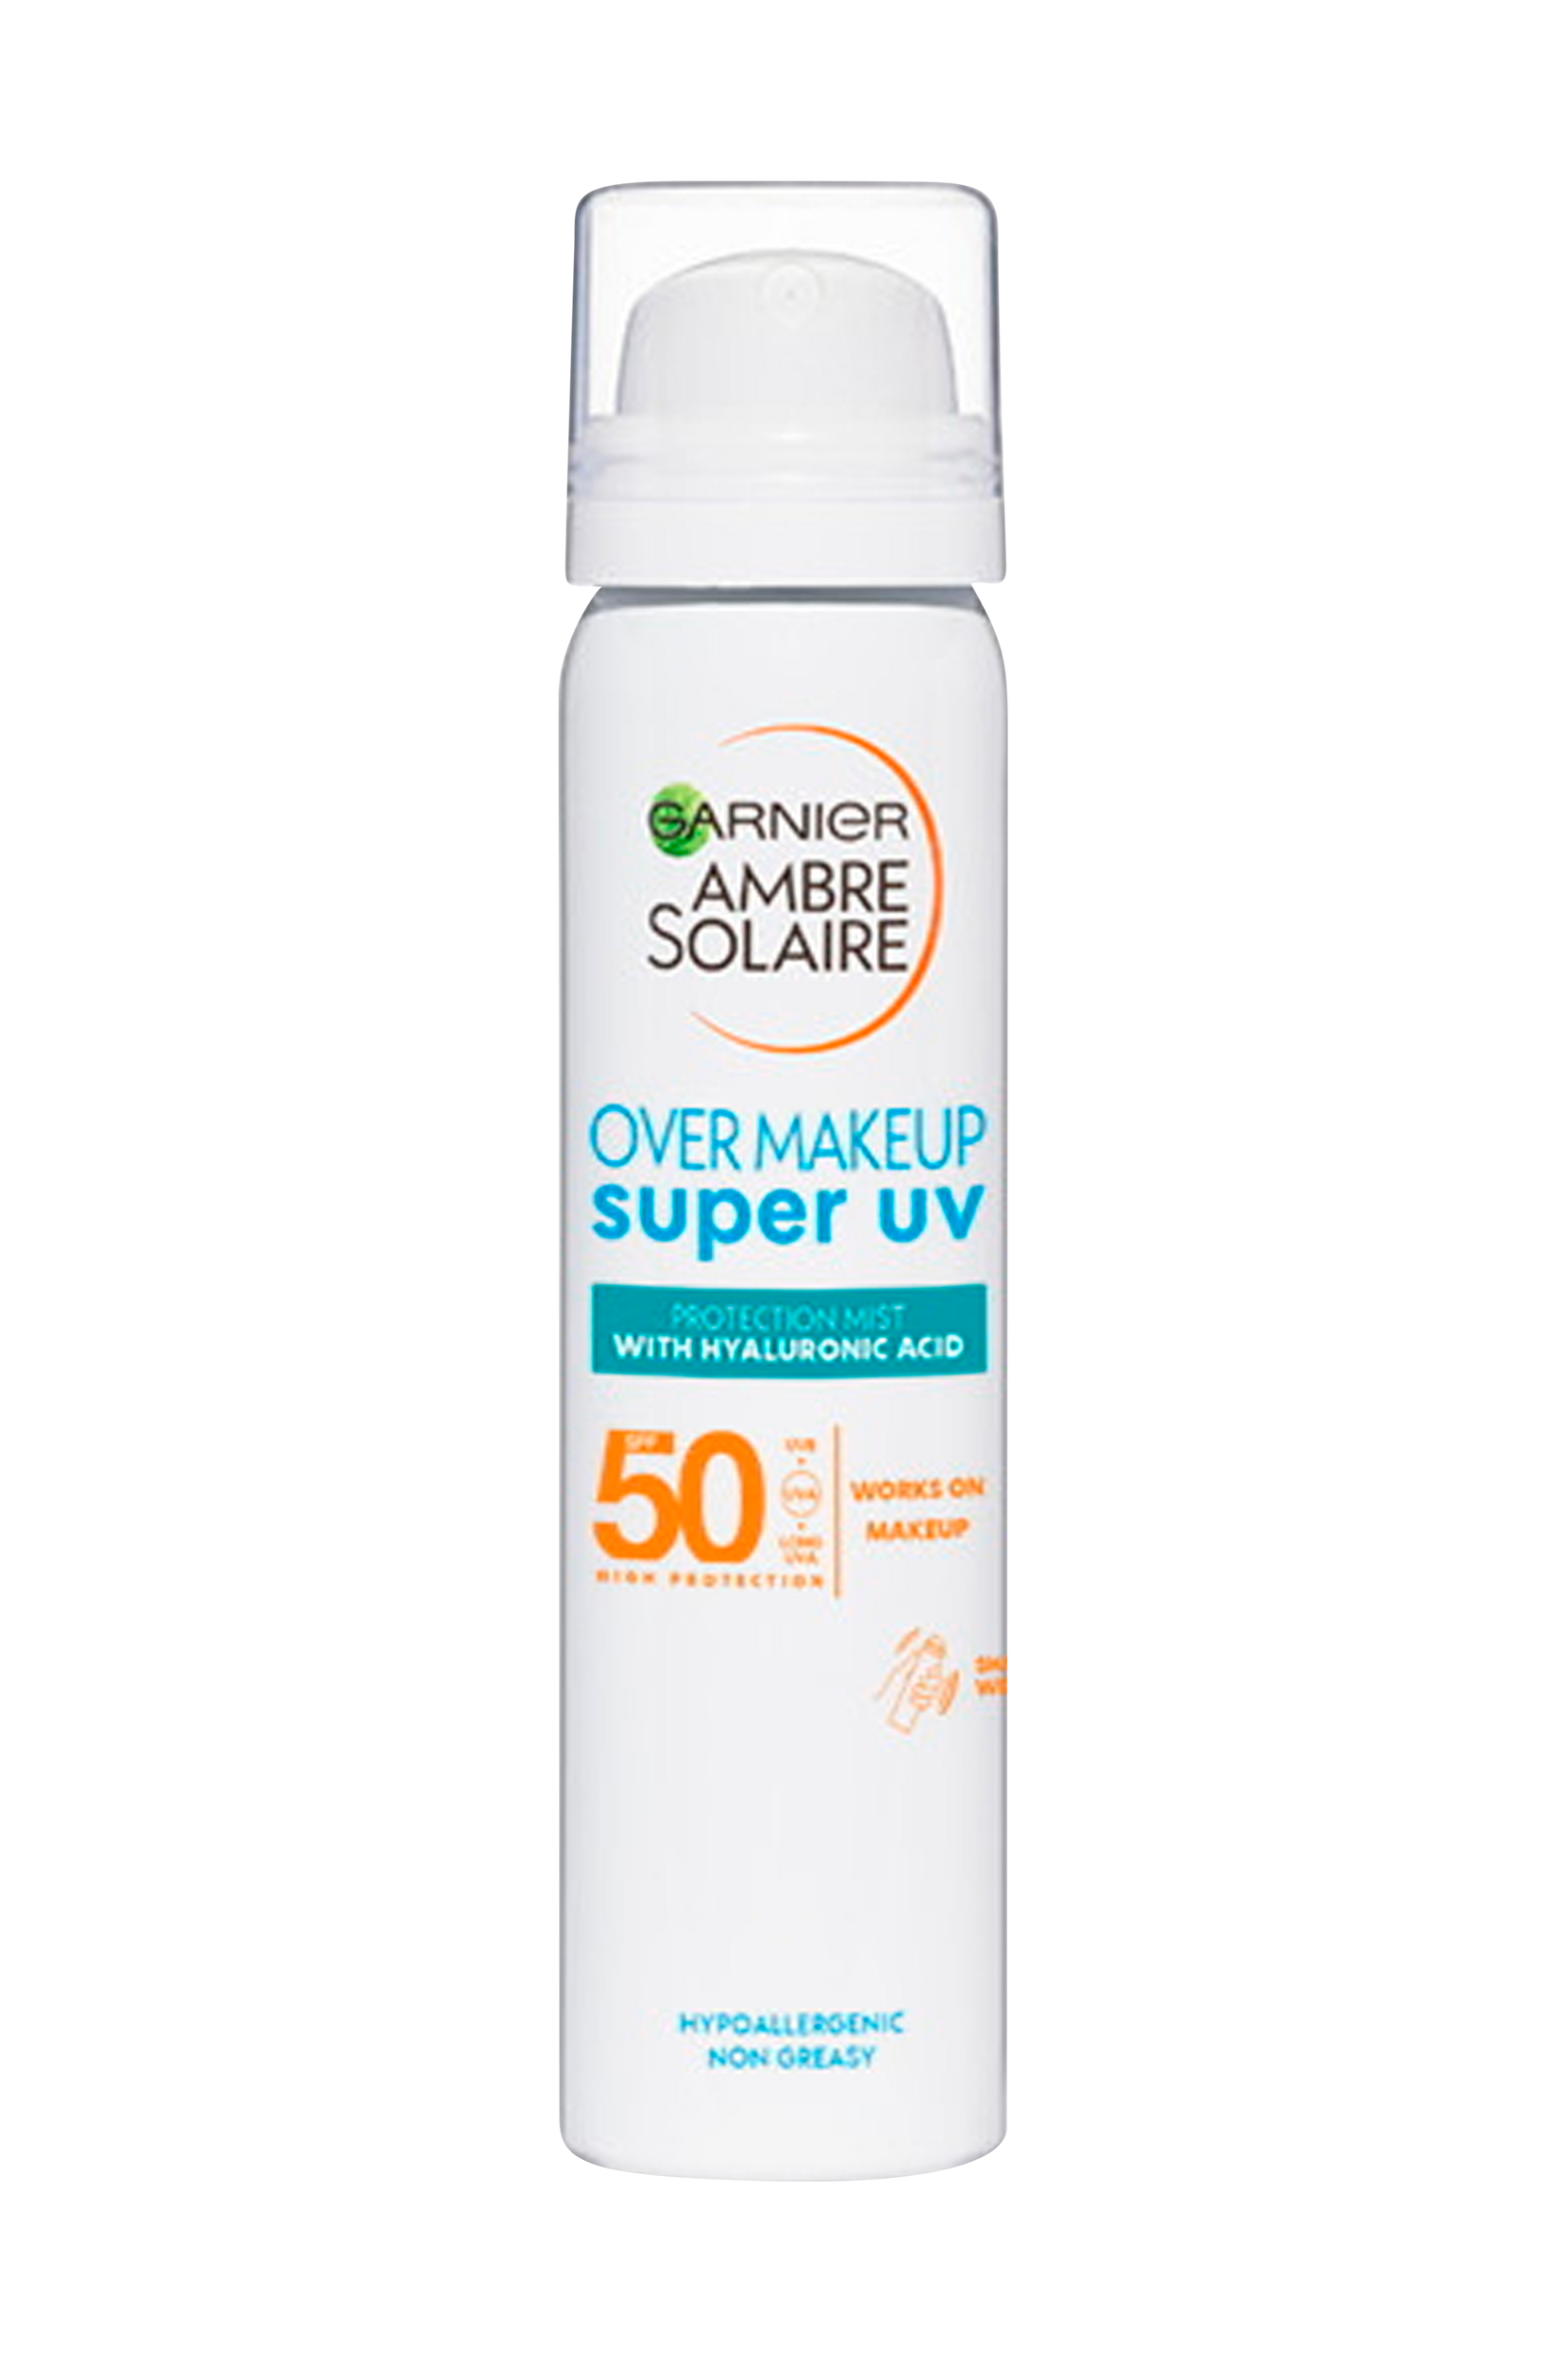 Garnier - Ambre Solaire Super UV Over Makeup Protection Mist with Hyaluronic Acid SPF50+ 50 ml